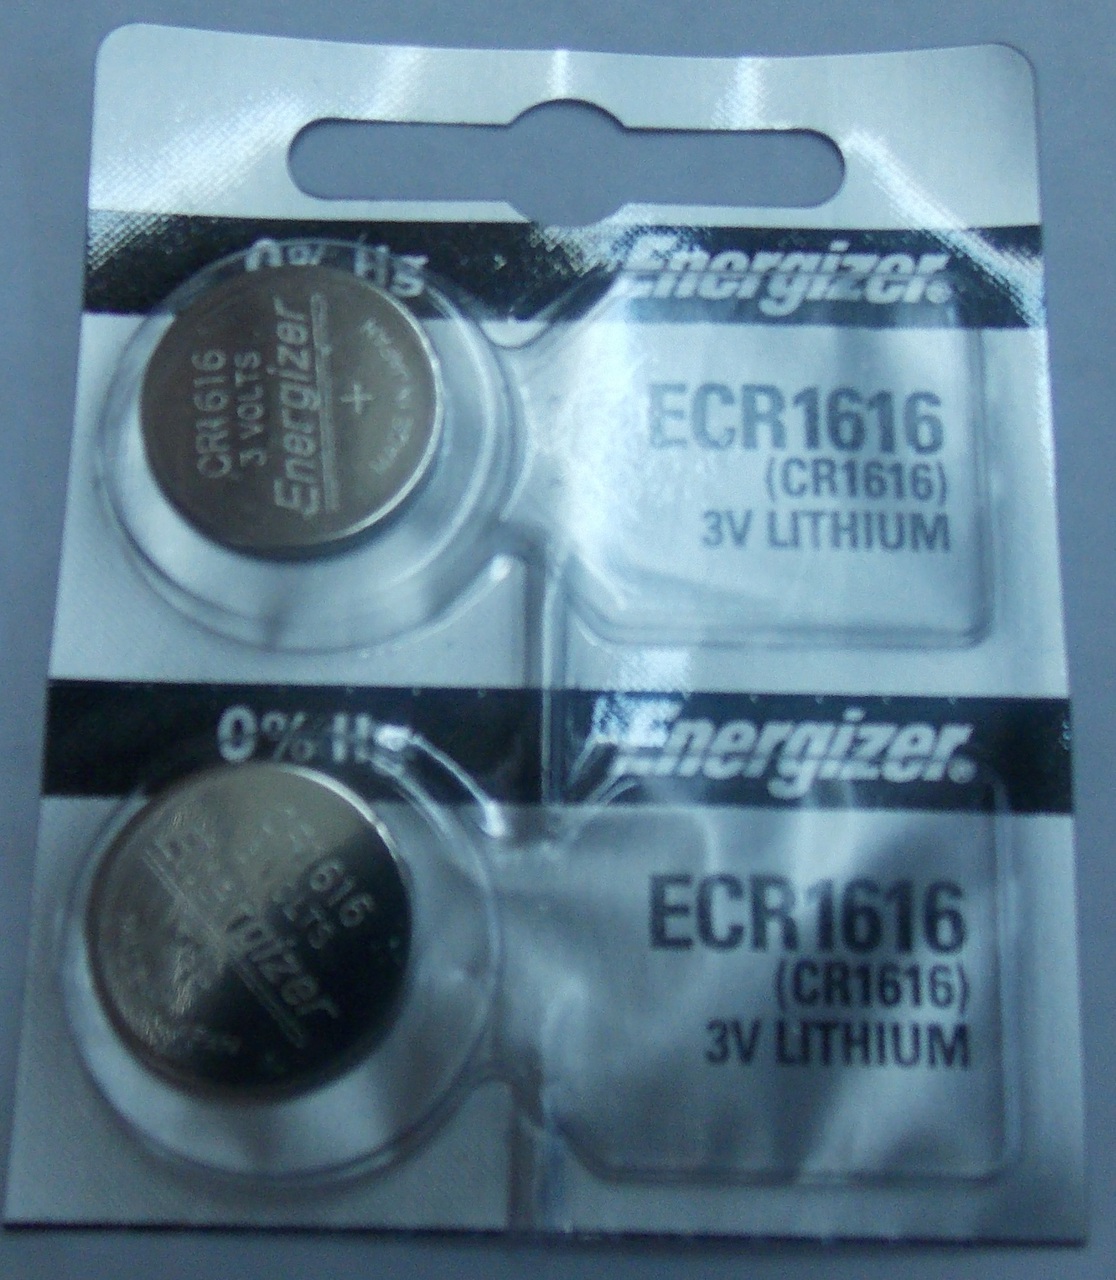 Energizer CR1616 3V Lithium Coin Battery 2 Pack + FREE SHIPPING